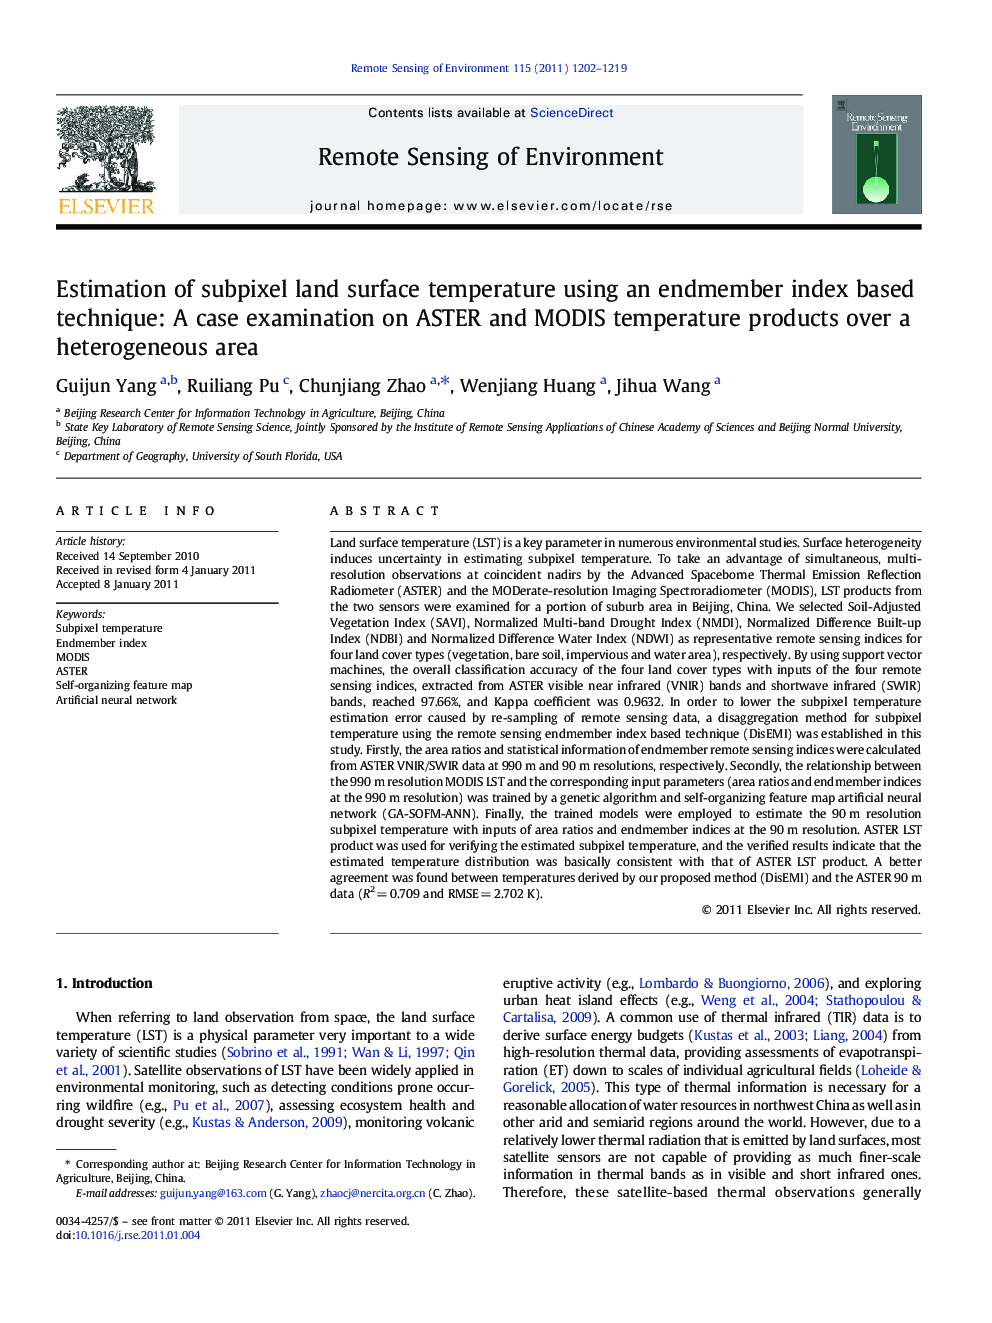 Estimation of subpixel land surface temperature using an endmember index based technique: A case examination on ASTER and MODIS temperature products over a heterogeneous area